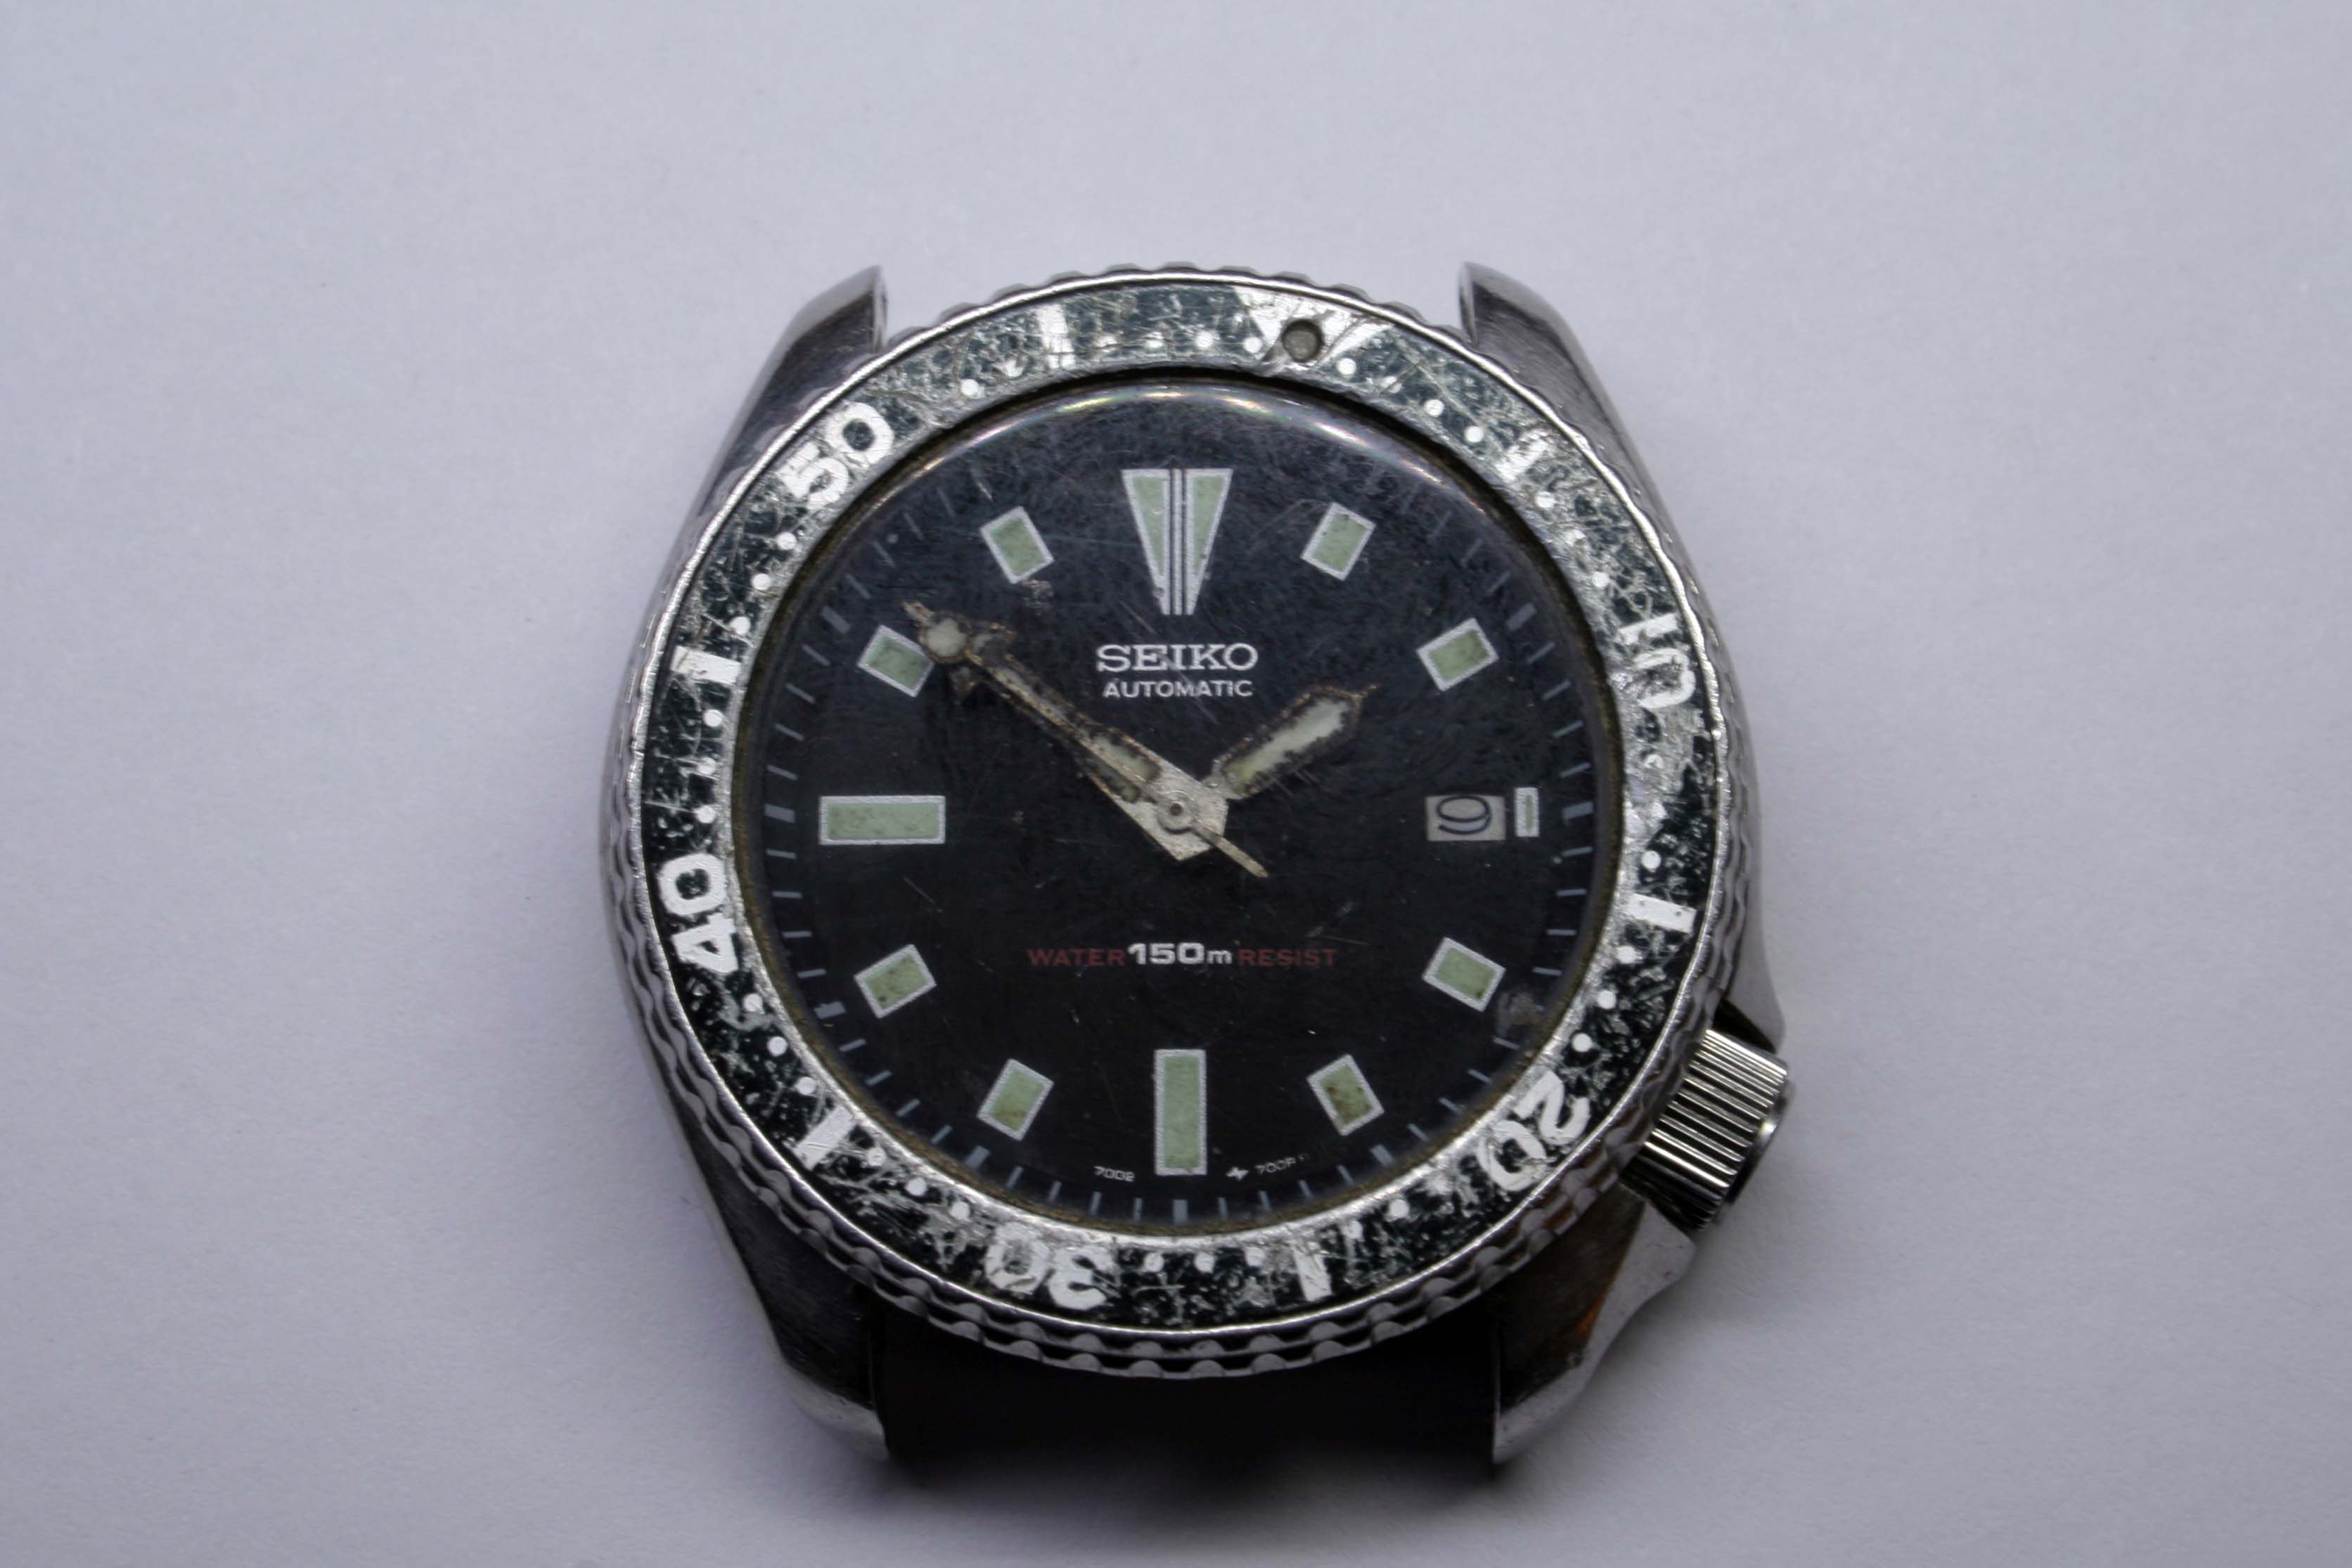 A Couple of 7002 Seiko Divers - Chat About Watches & The Industry Here -  Watch Repair Talk